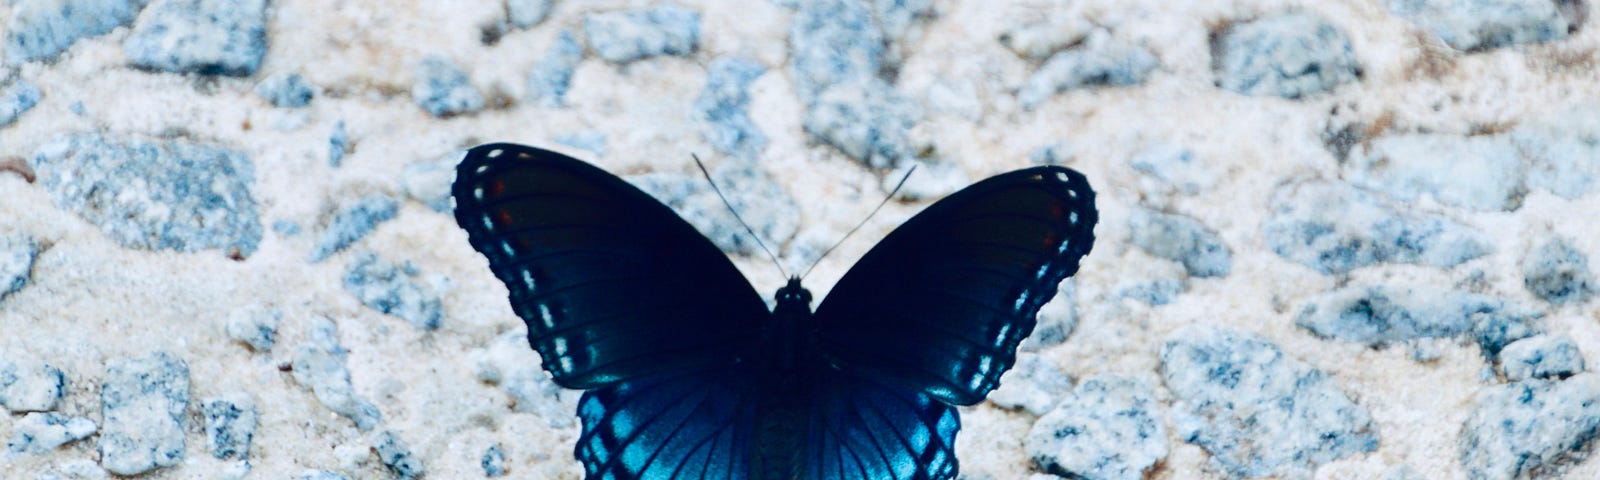 A beautiful dark and light blue butterfly sitting atop blue and white stones